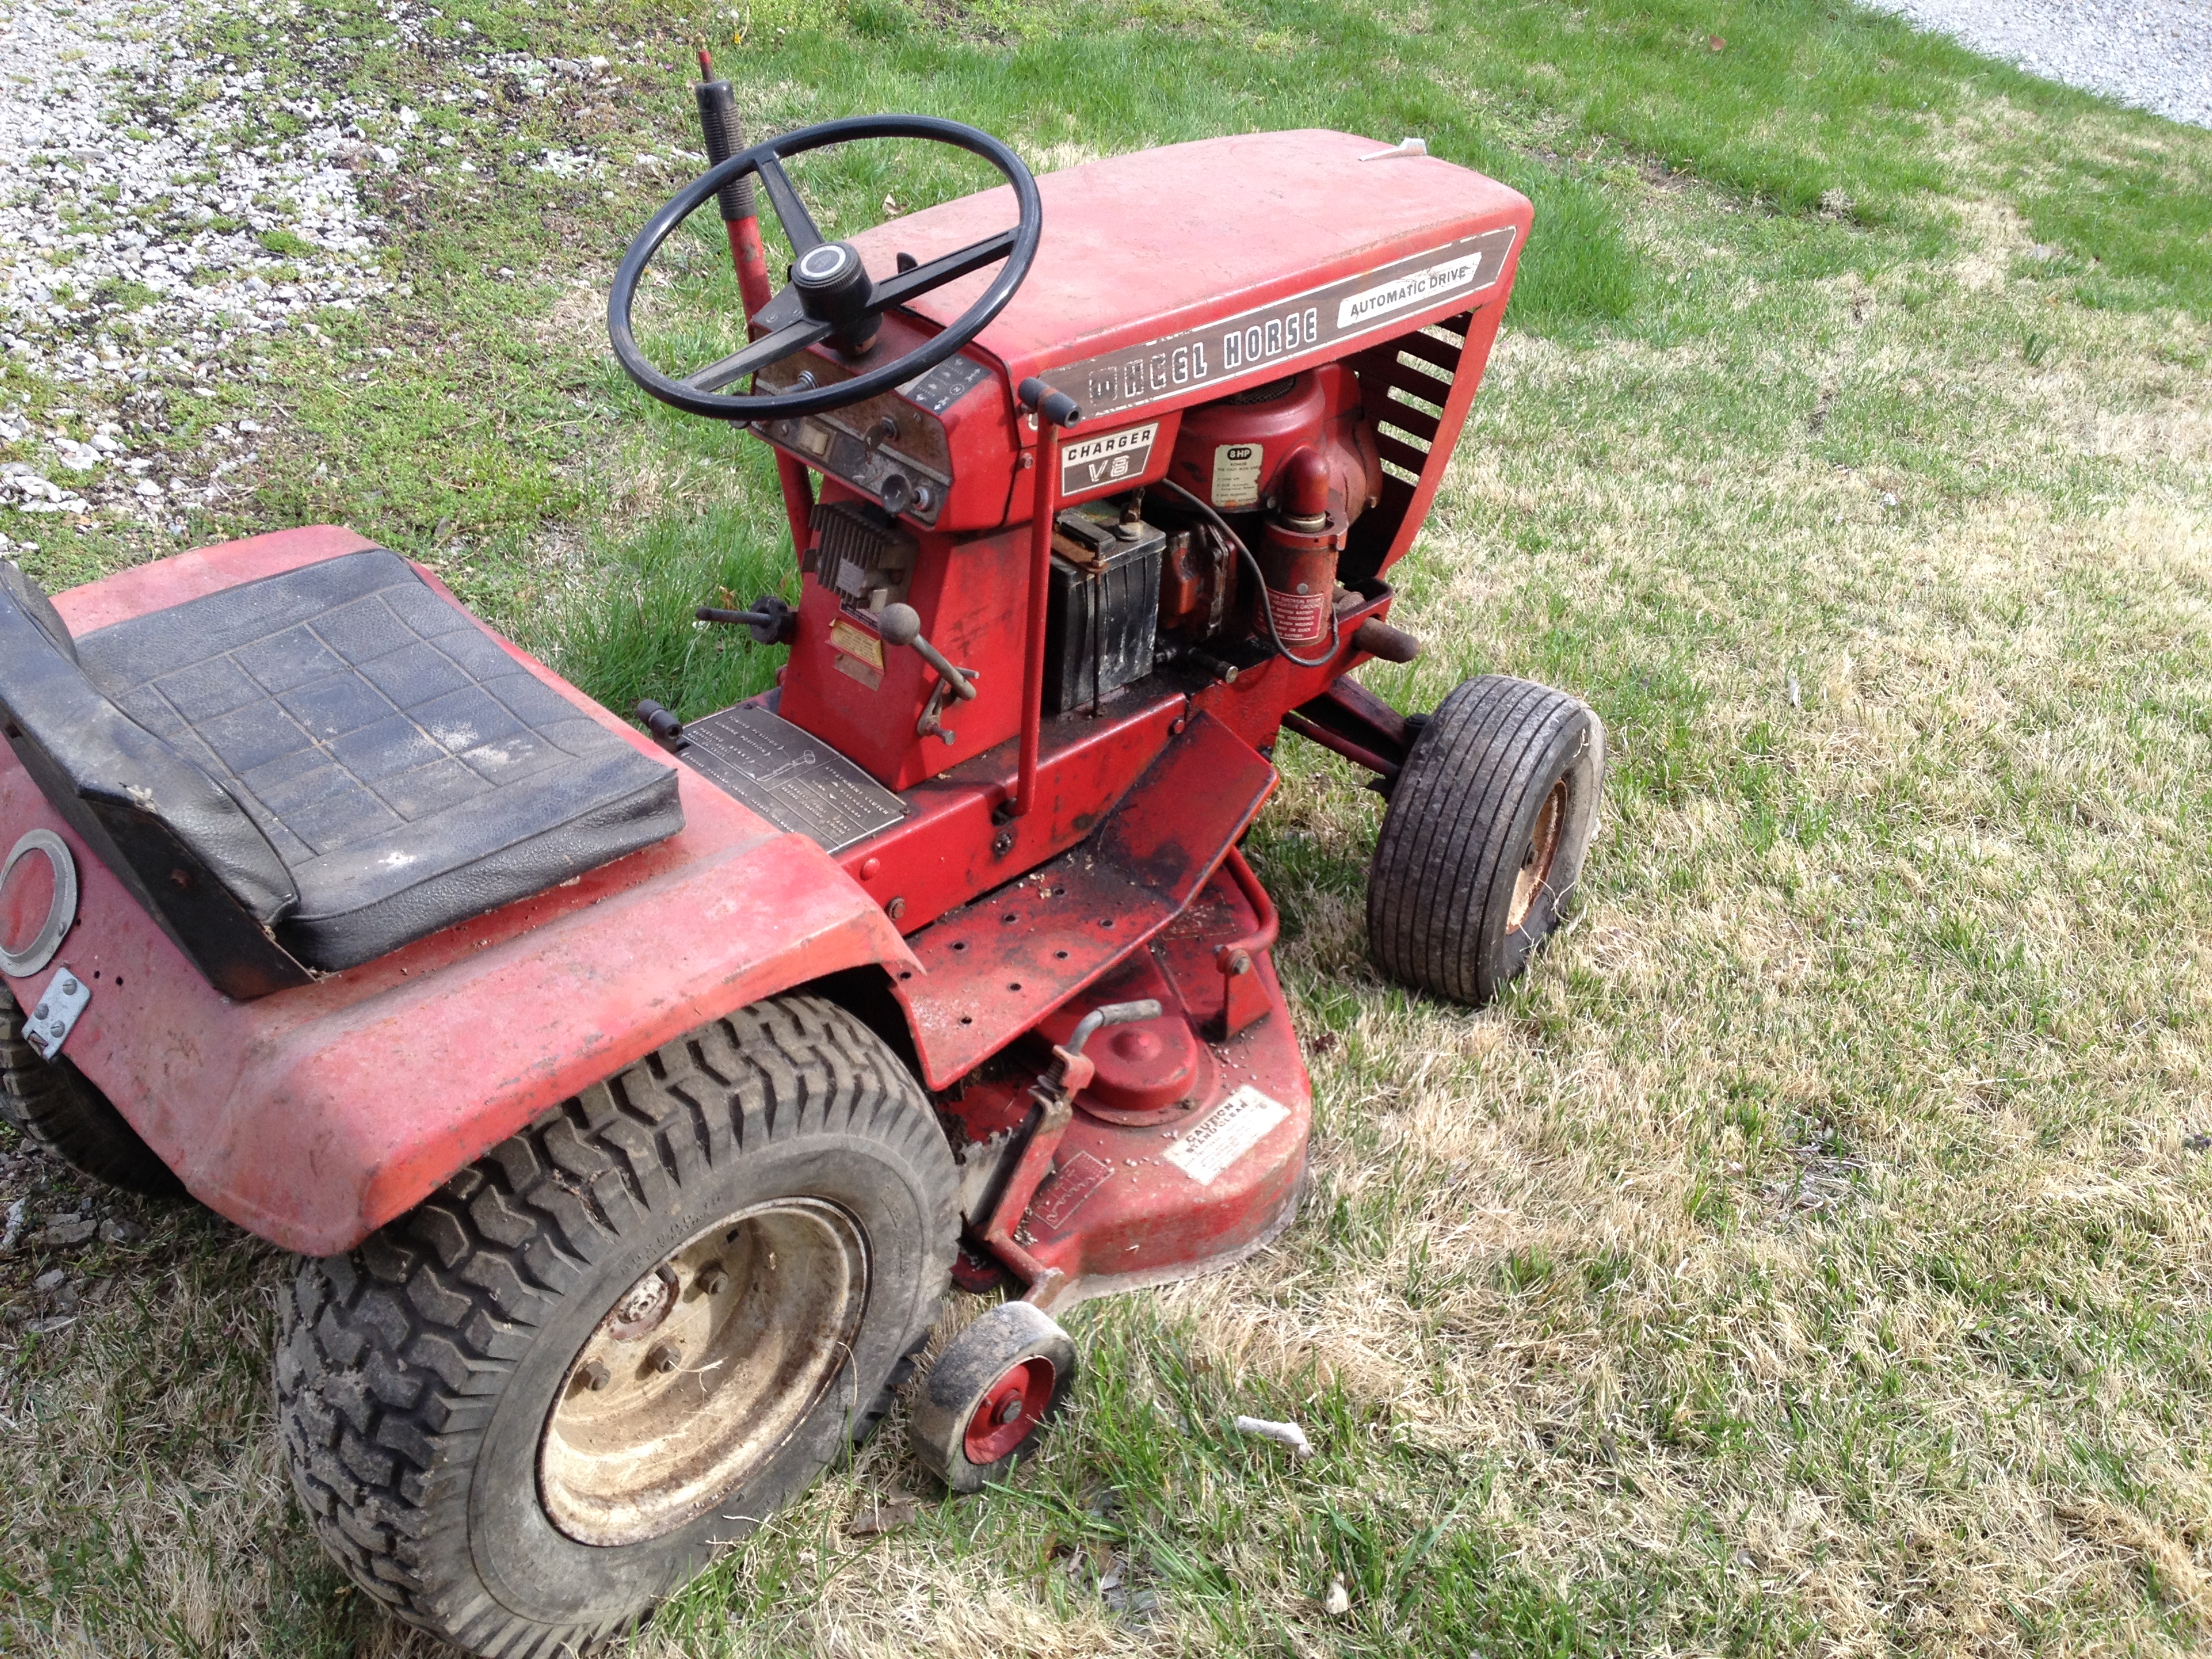 Charger V8 - Wheel Horse for Sale - RedSquare Wheel Horse Forum